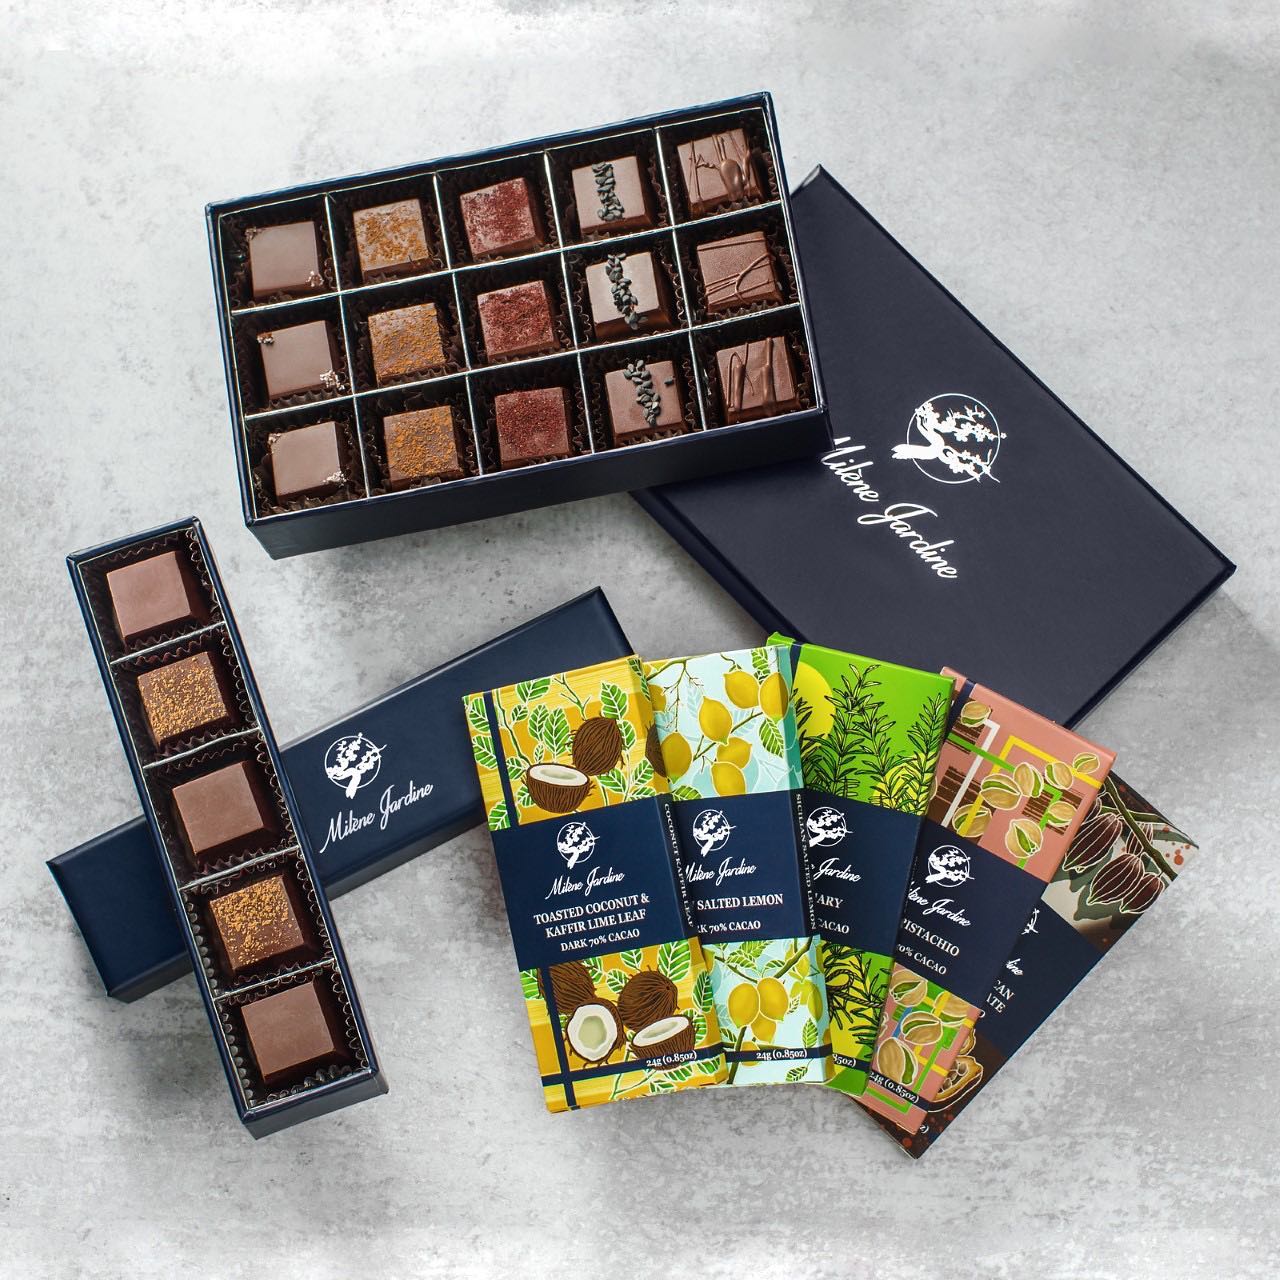 Female-owned and made-by-hand in in New York City, Milène Jardine Chocolatier offers bespoke, international chocolate inspired by her personal mantra: Live by Love. After exploring over 35 countries and meeting inspirational people every step of the way, Milène believes in the healing power of food, of connection, and of love.

A favorite of Hillary Clinton and Warren Buffet, each piece contains the finest natural ingredients: ethically sourced dark chocolate along with exotic herbs and spices that heal and soothe the body.

This month ELITE members enjoy 15% off these artisanal confections. DM us for the exclusive code!

#milene#milenejardine#chocolatier#chocolates#truffles#chocolate#truffle#sweets#dessert